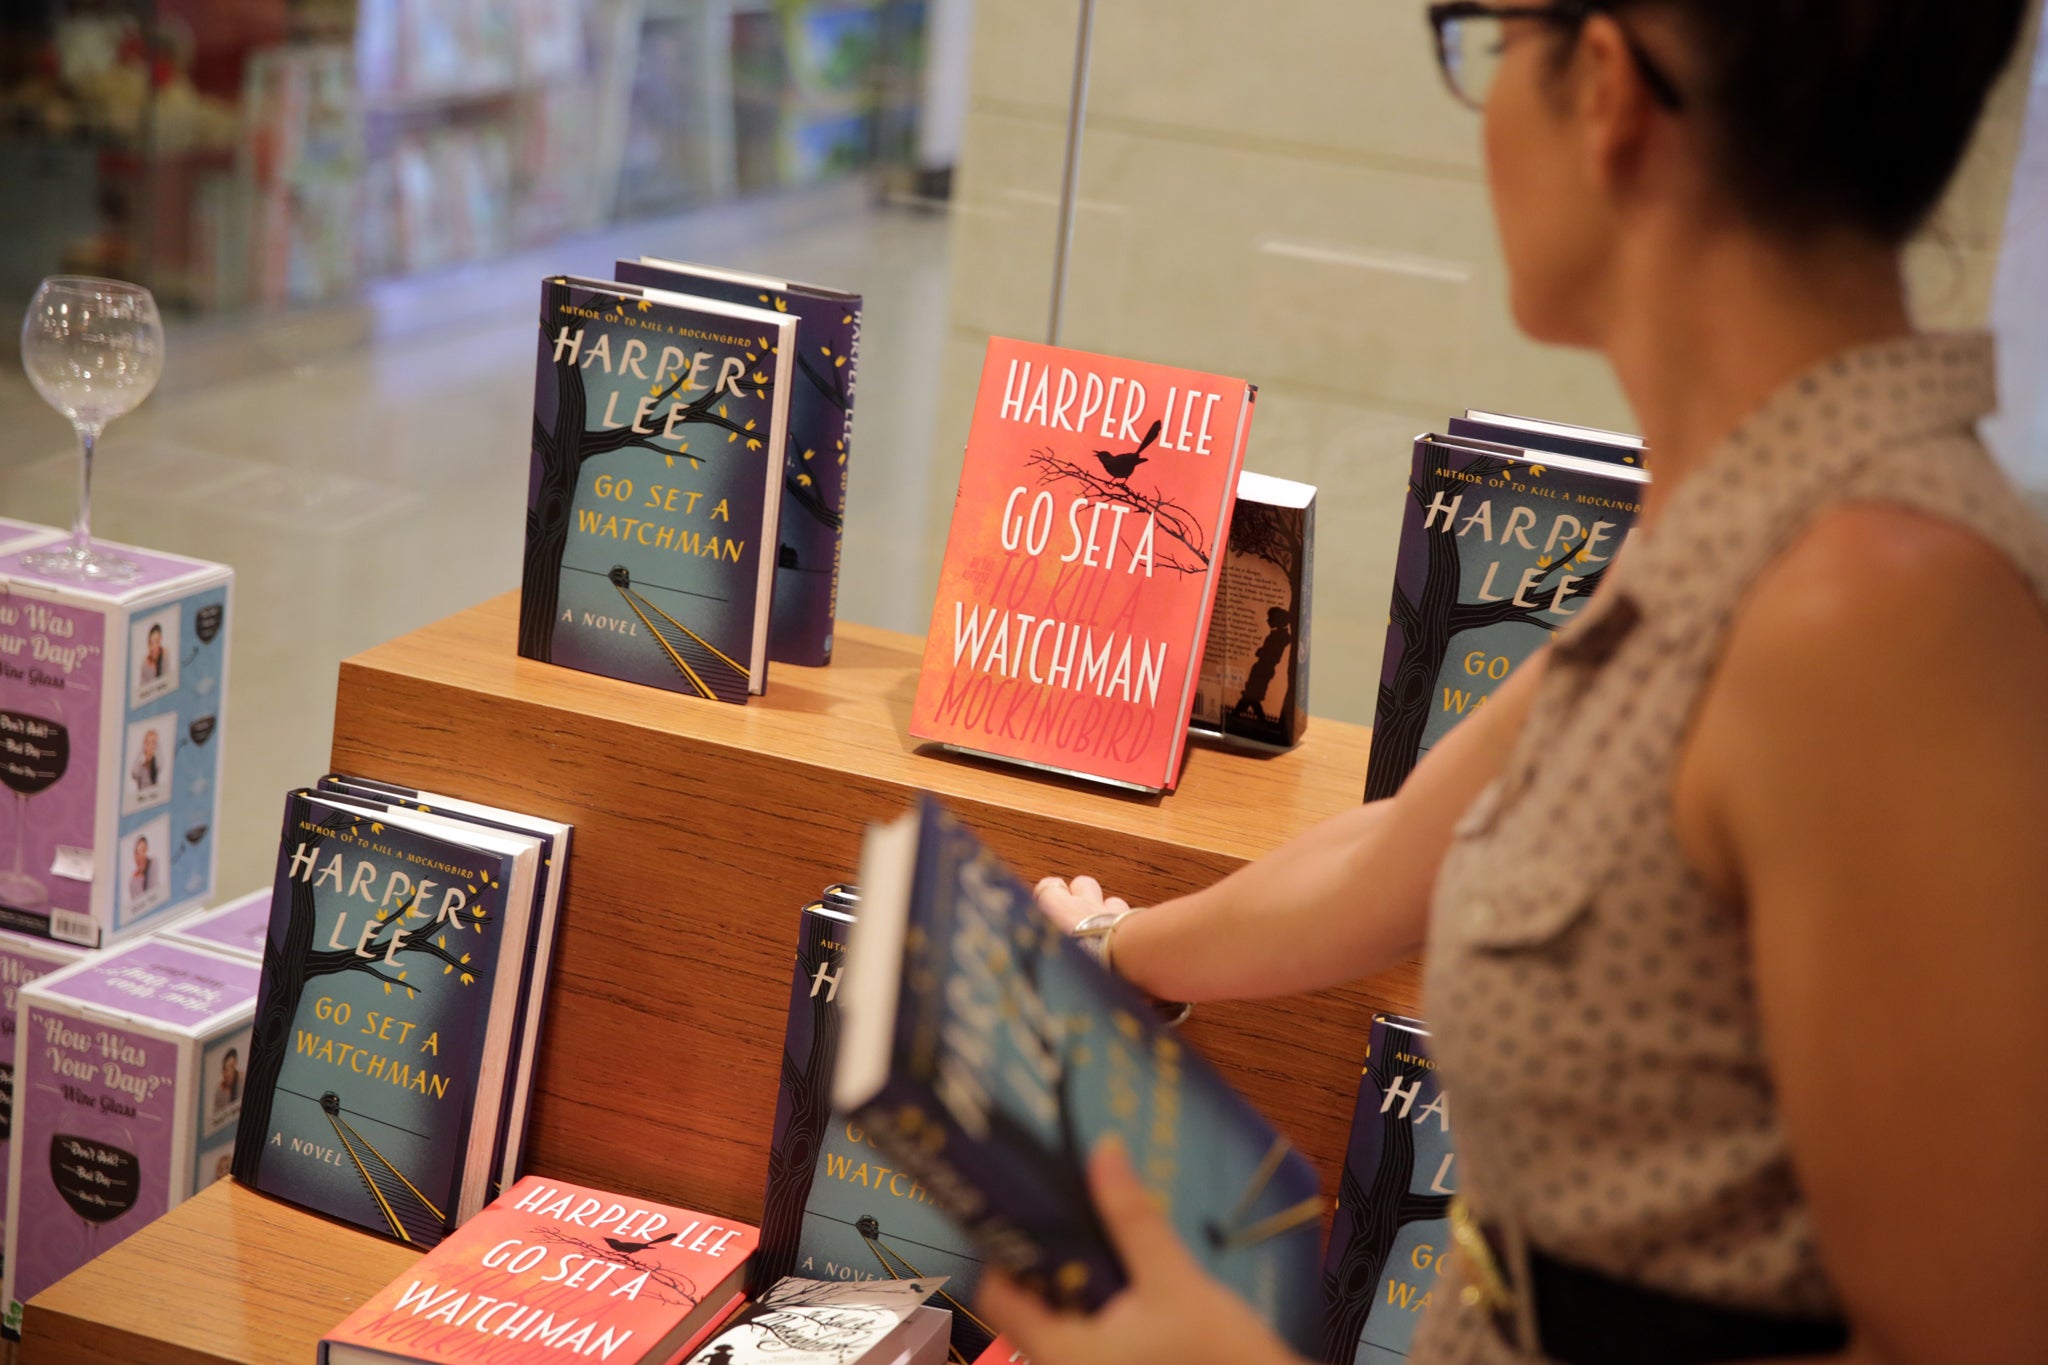 A bookseller displays copies of Go Set A Watchman before the midnight release of Harper Lee's novel